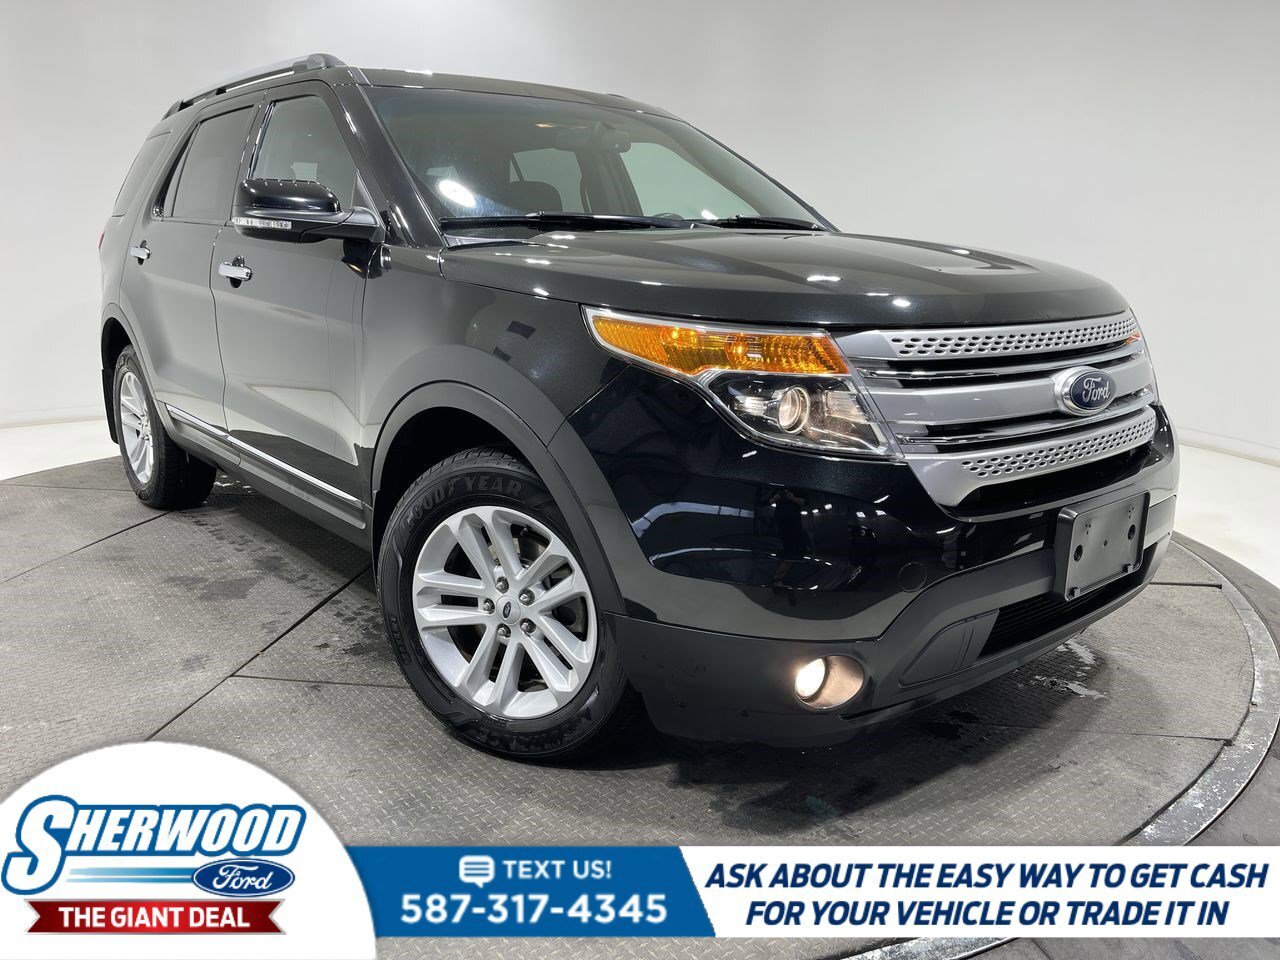 2013 Ford Explorer XLT- $0 Down $181 Weekly